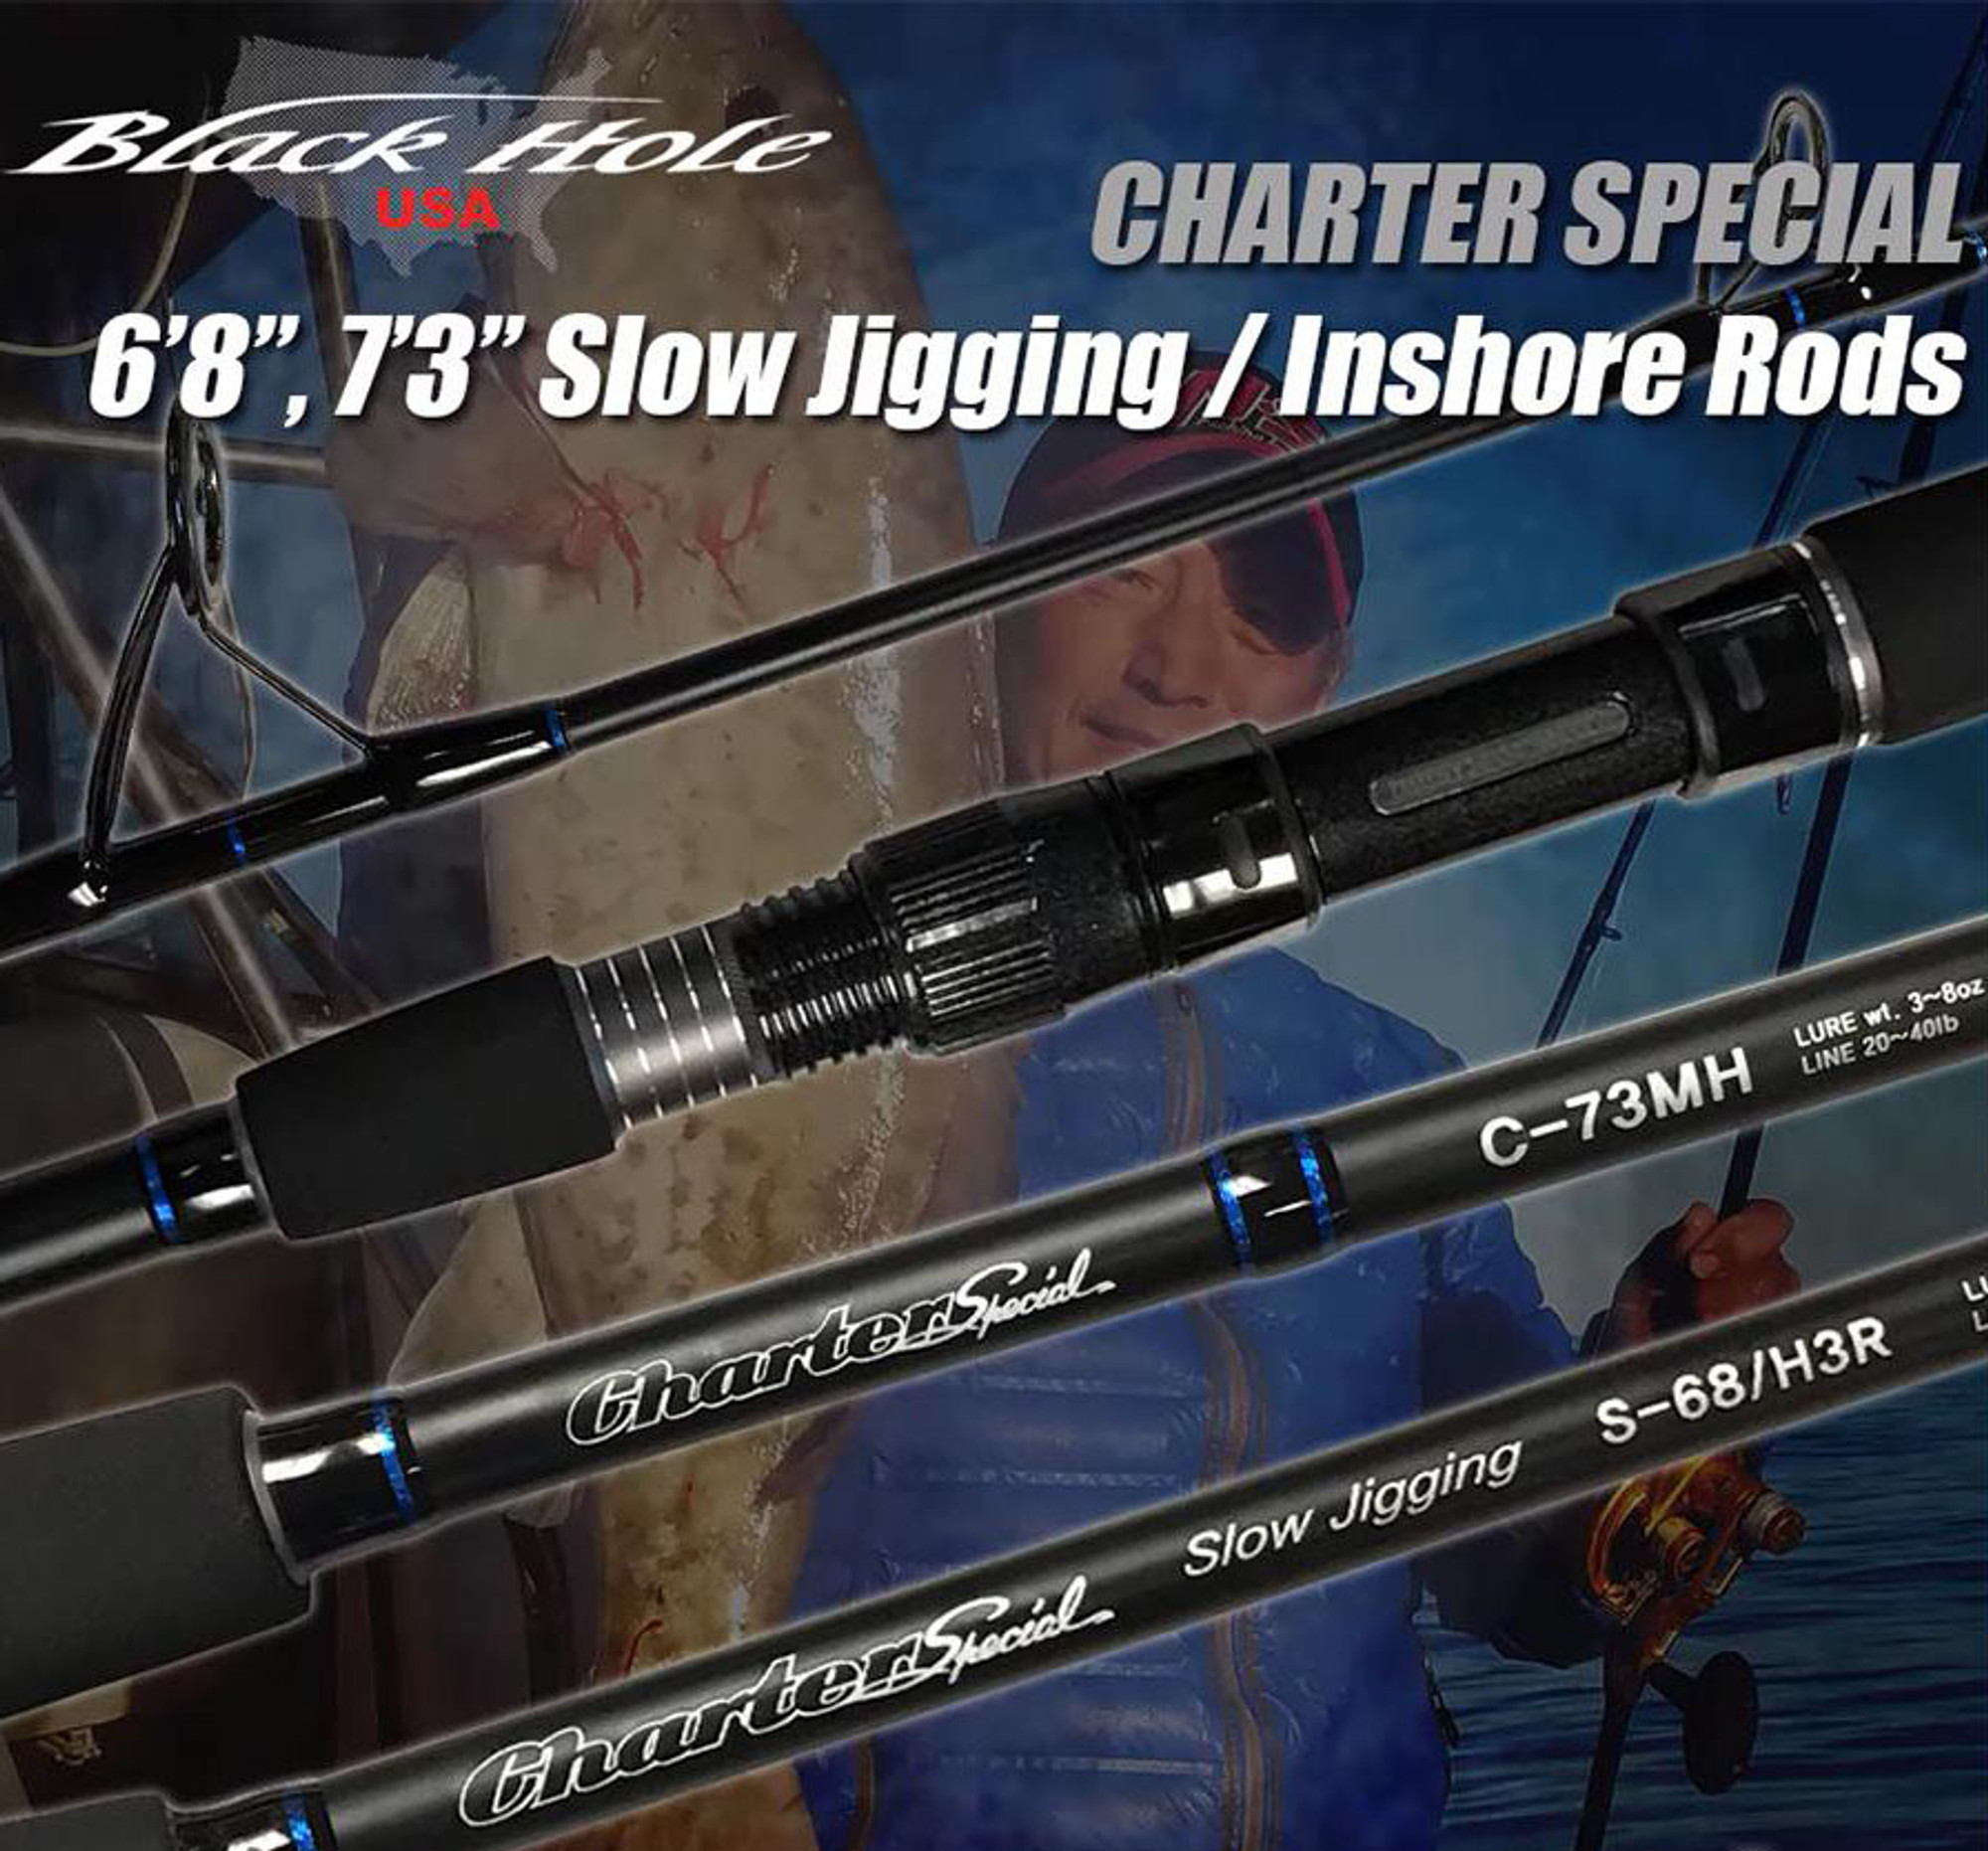 Black Hole Charter Special Inshore & Slow Pitch Jigging Rod (Model